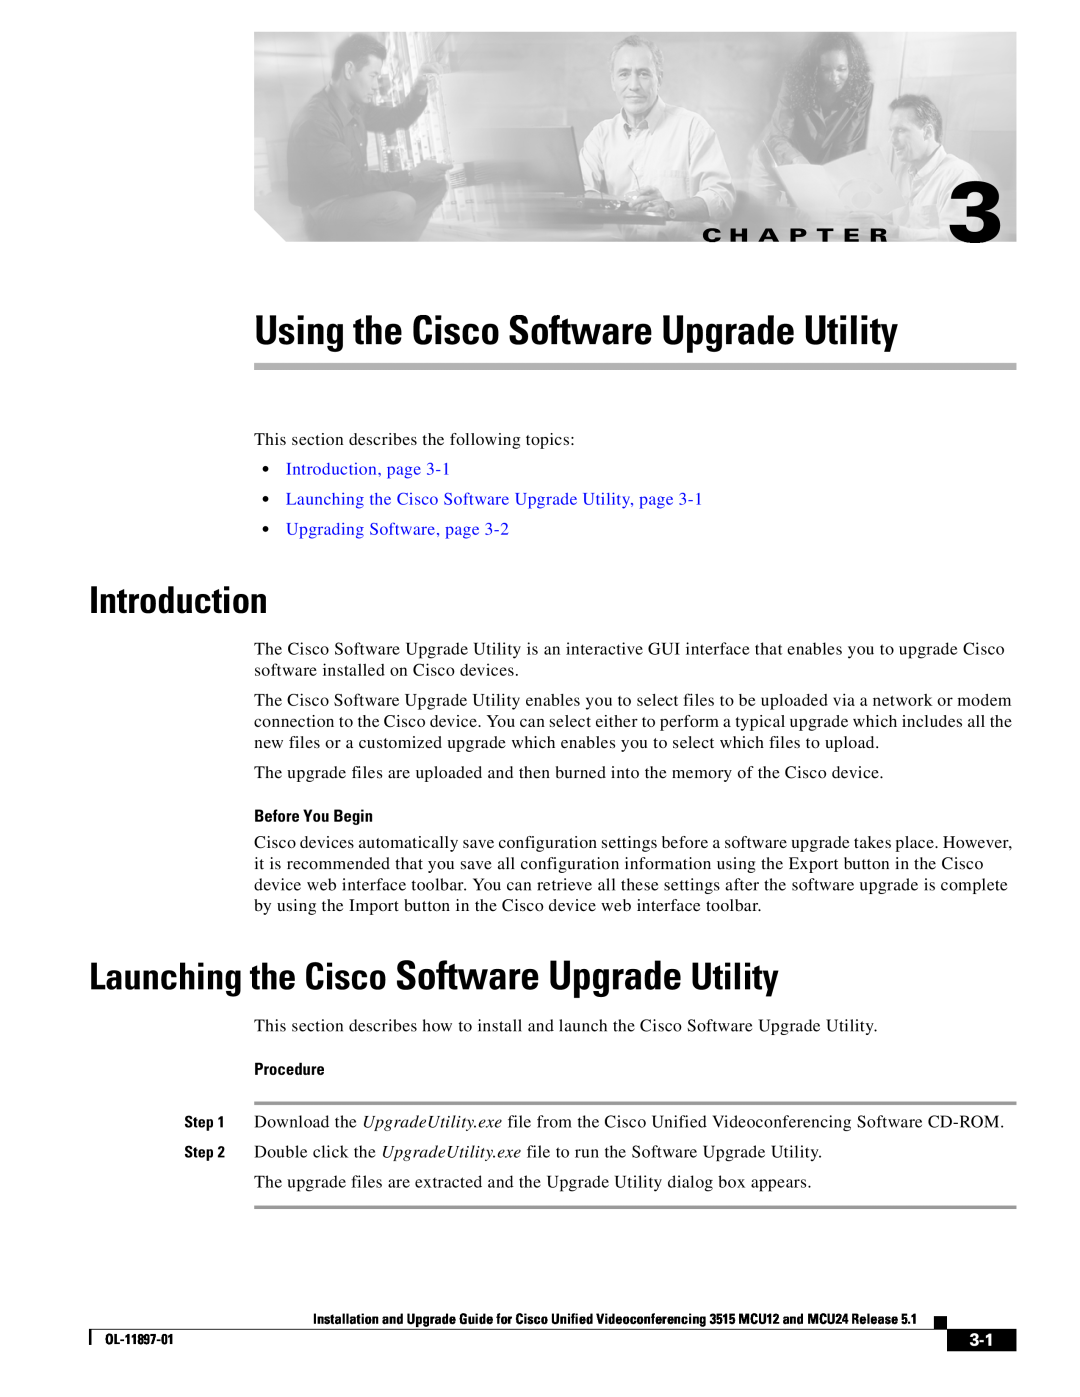 Cisco Systems MCU24 Using the Cisco Software Upgrade Utility, Introduction, Launching the Cisco Software Upgrade Utility 